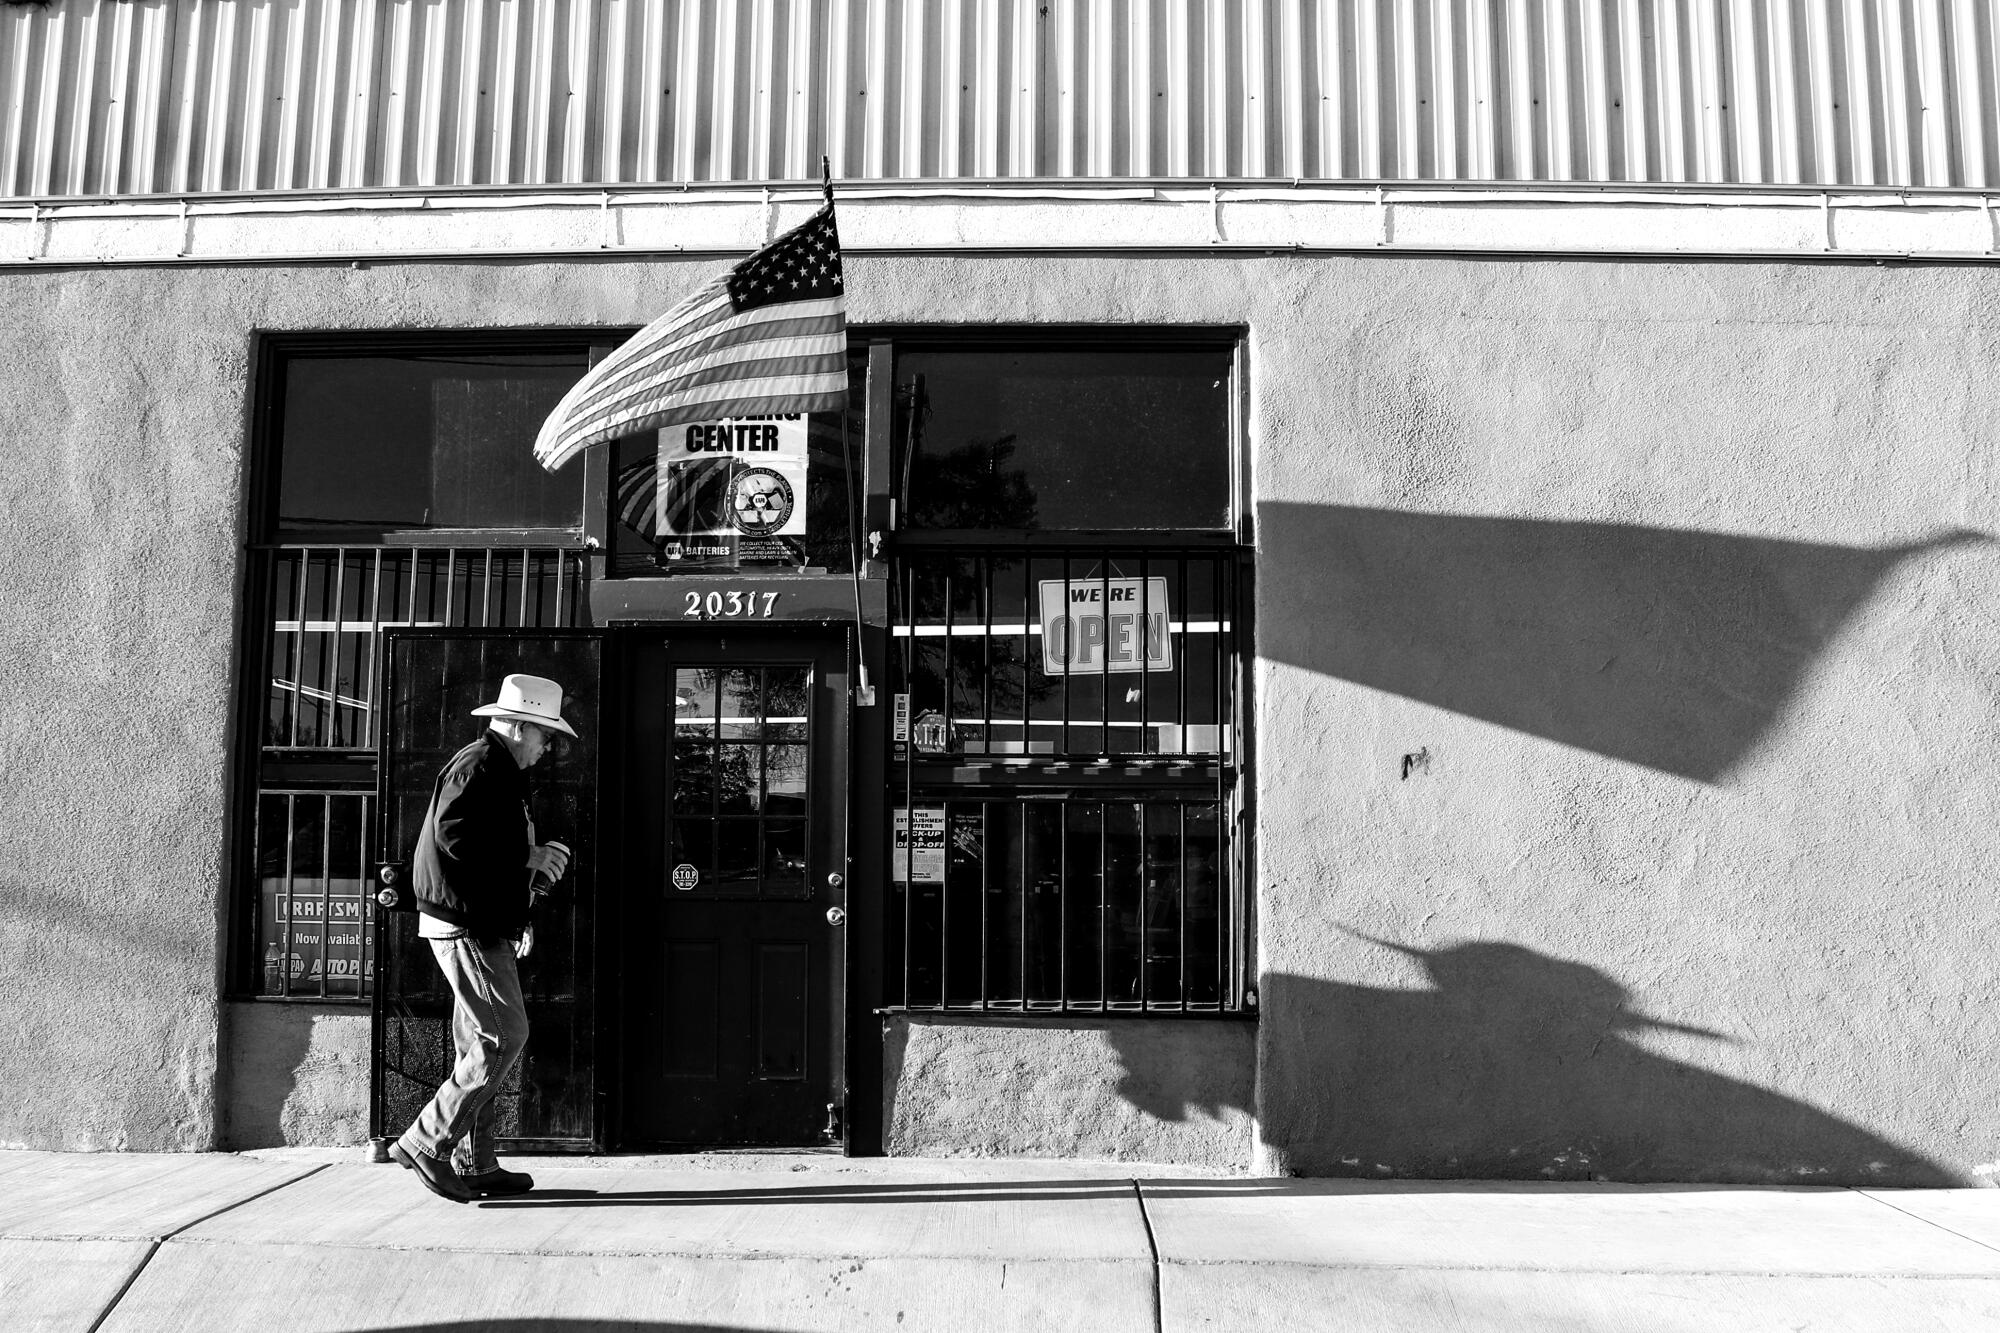 A man enters a doorway flanked by security bars in a storefront beneath an American flag.